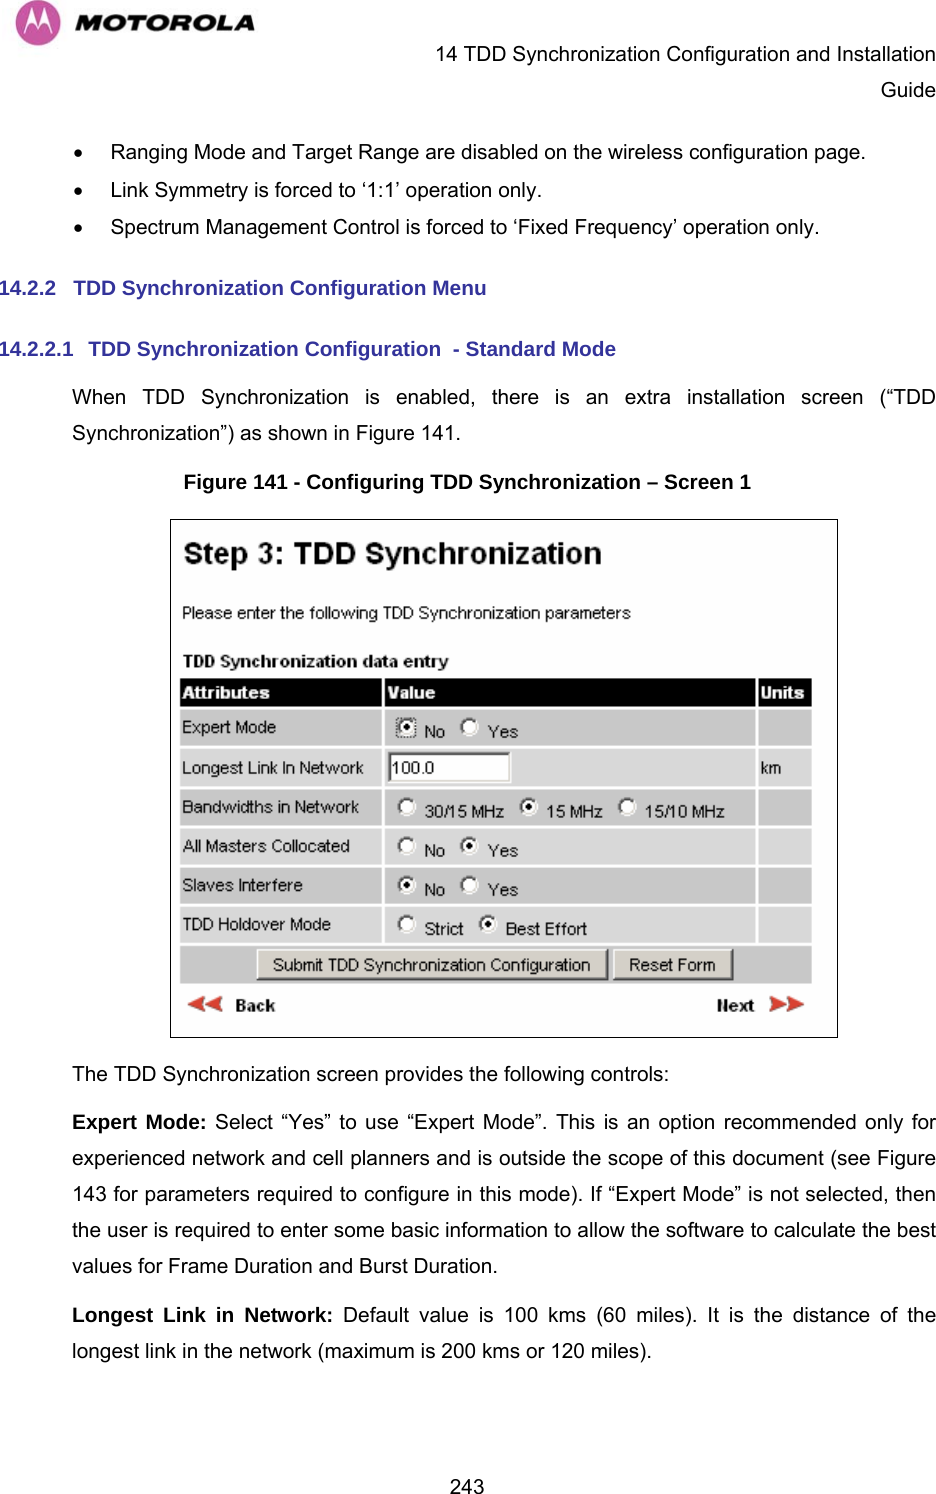   14 TDD Synchronization Configuration and Installation Guide  243•  Ranging Mode and Target Range are disabled on the wireless configuration page. •  Link Symmetry is forced to ‘1:1’ operation only. •  Spectrum Management Control is forced to ‘Fixed Frequency’ operation only. 14.2.2  TDD Synchronization Configuration Menu 14.2.2.1 TDD Synchronization Configuration  - Standard Mode When TDD Synchronization is enabled, there is an extra installation screen (“TDD Synchronization”) as shown in Figure 141. Figure 141 - Configuring TDD Synchronization – Screen 1  The TDD Synchronization screen provides the following controls: Expert Mode: Select “Yes” to use “Expert Mode”. This is an option recommended only for experienced network and cell planners and is outside the scope of this document (see Figure 143 for parameters required to configure in this mode). If “Expert Mode” is not selected, then the user is required to enter some basic information to allow the software to calculate the best values for Frame Duration and Burst Duration.  Longest Link in Network: Default value is 100 kms (60 miles). It is the distance of the longest link in the network (maximum is 200 kms or 120 miles). 